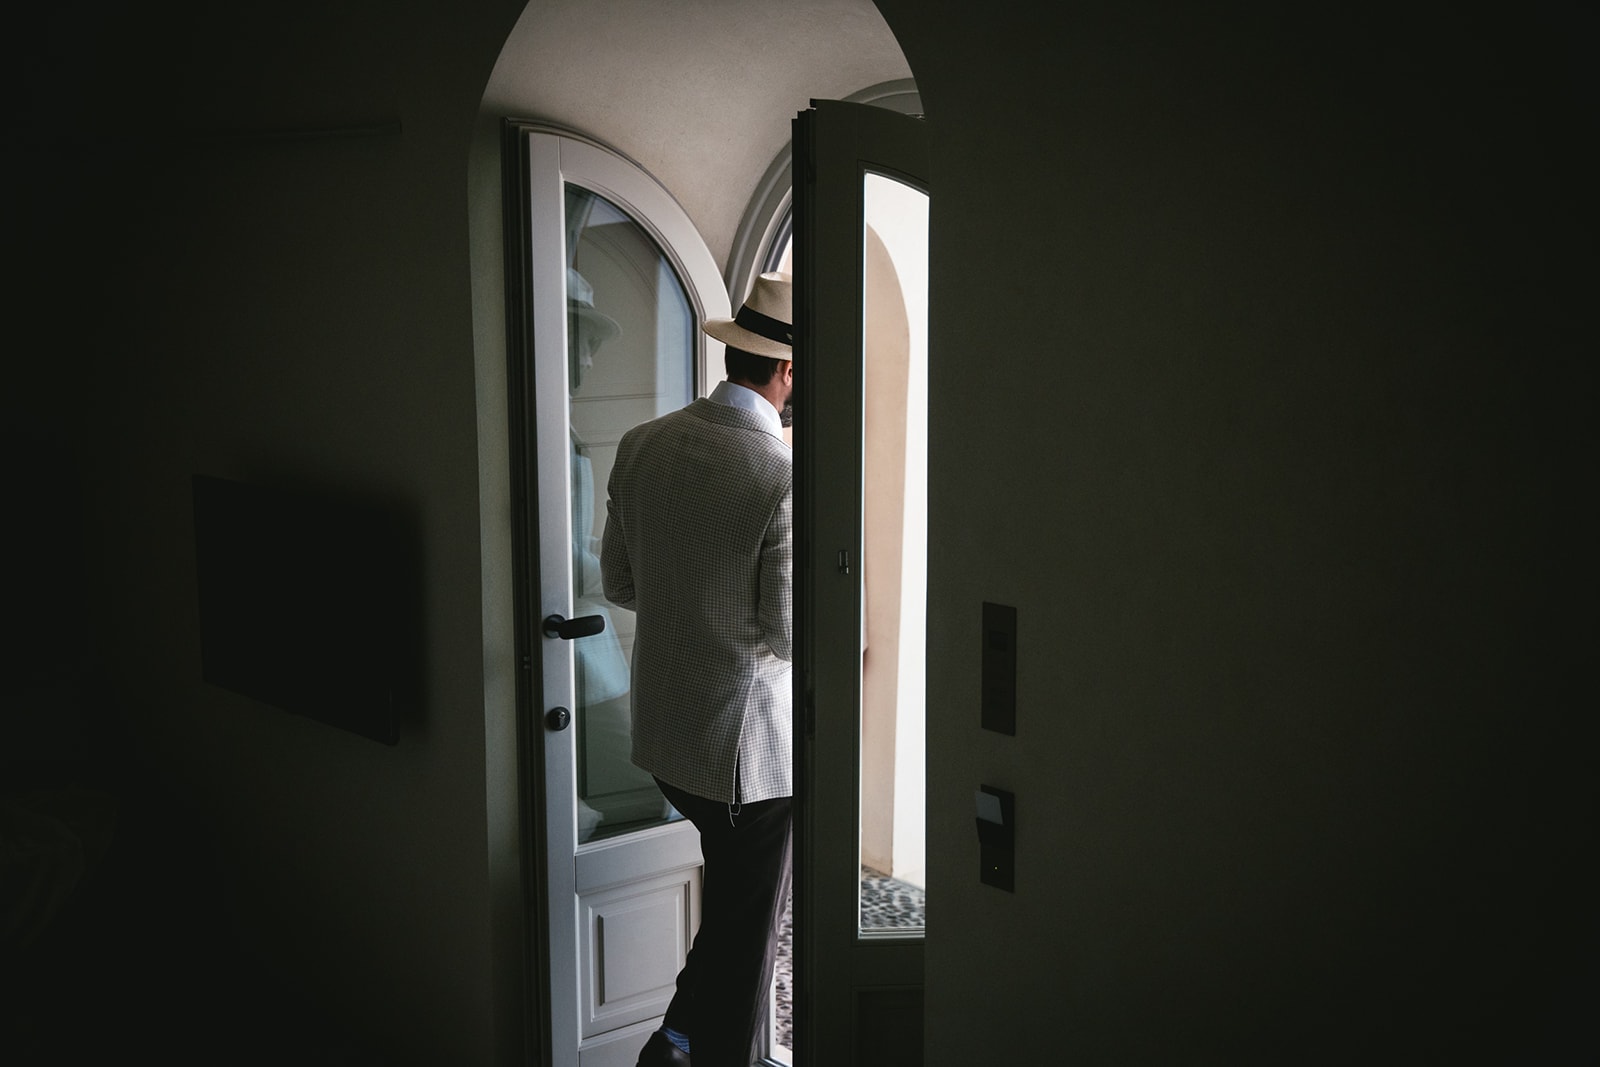 Groom's departure, stepping into the future, elopement on Santorini awaits